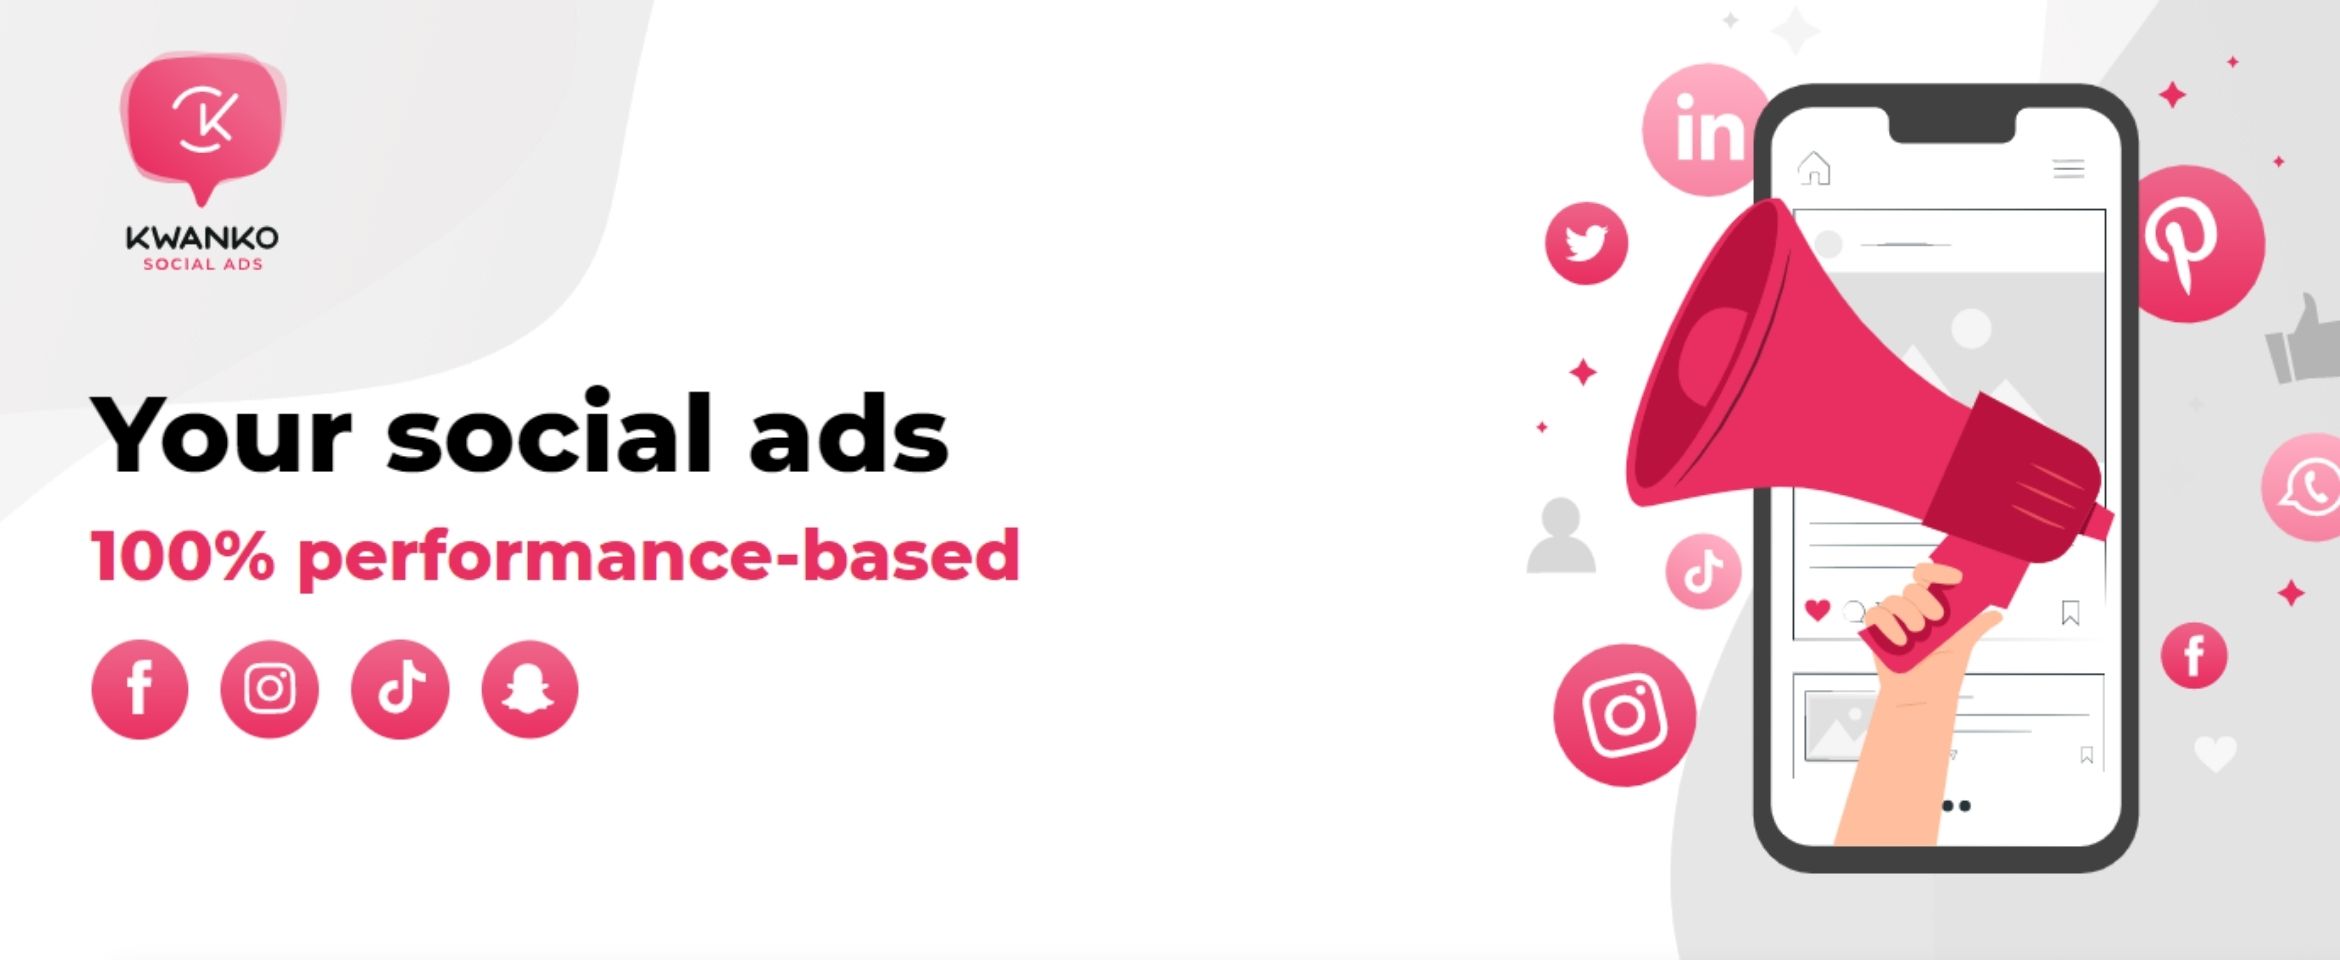 Kwanko Social Ads, social ads that are 100% performance-based